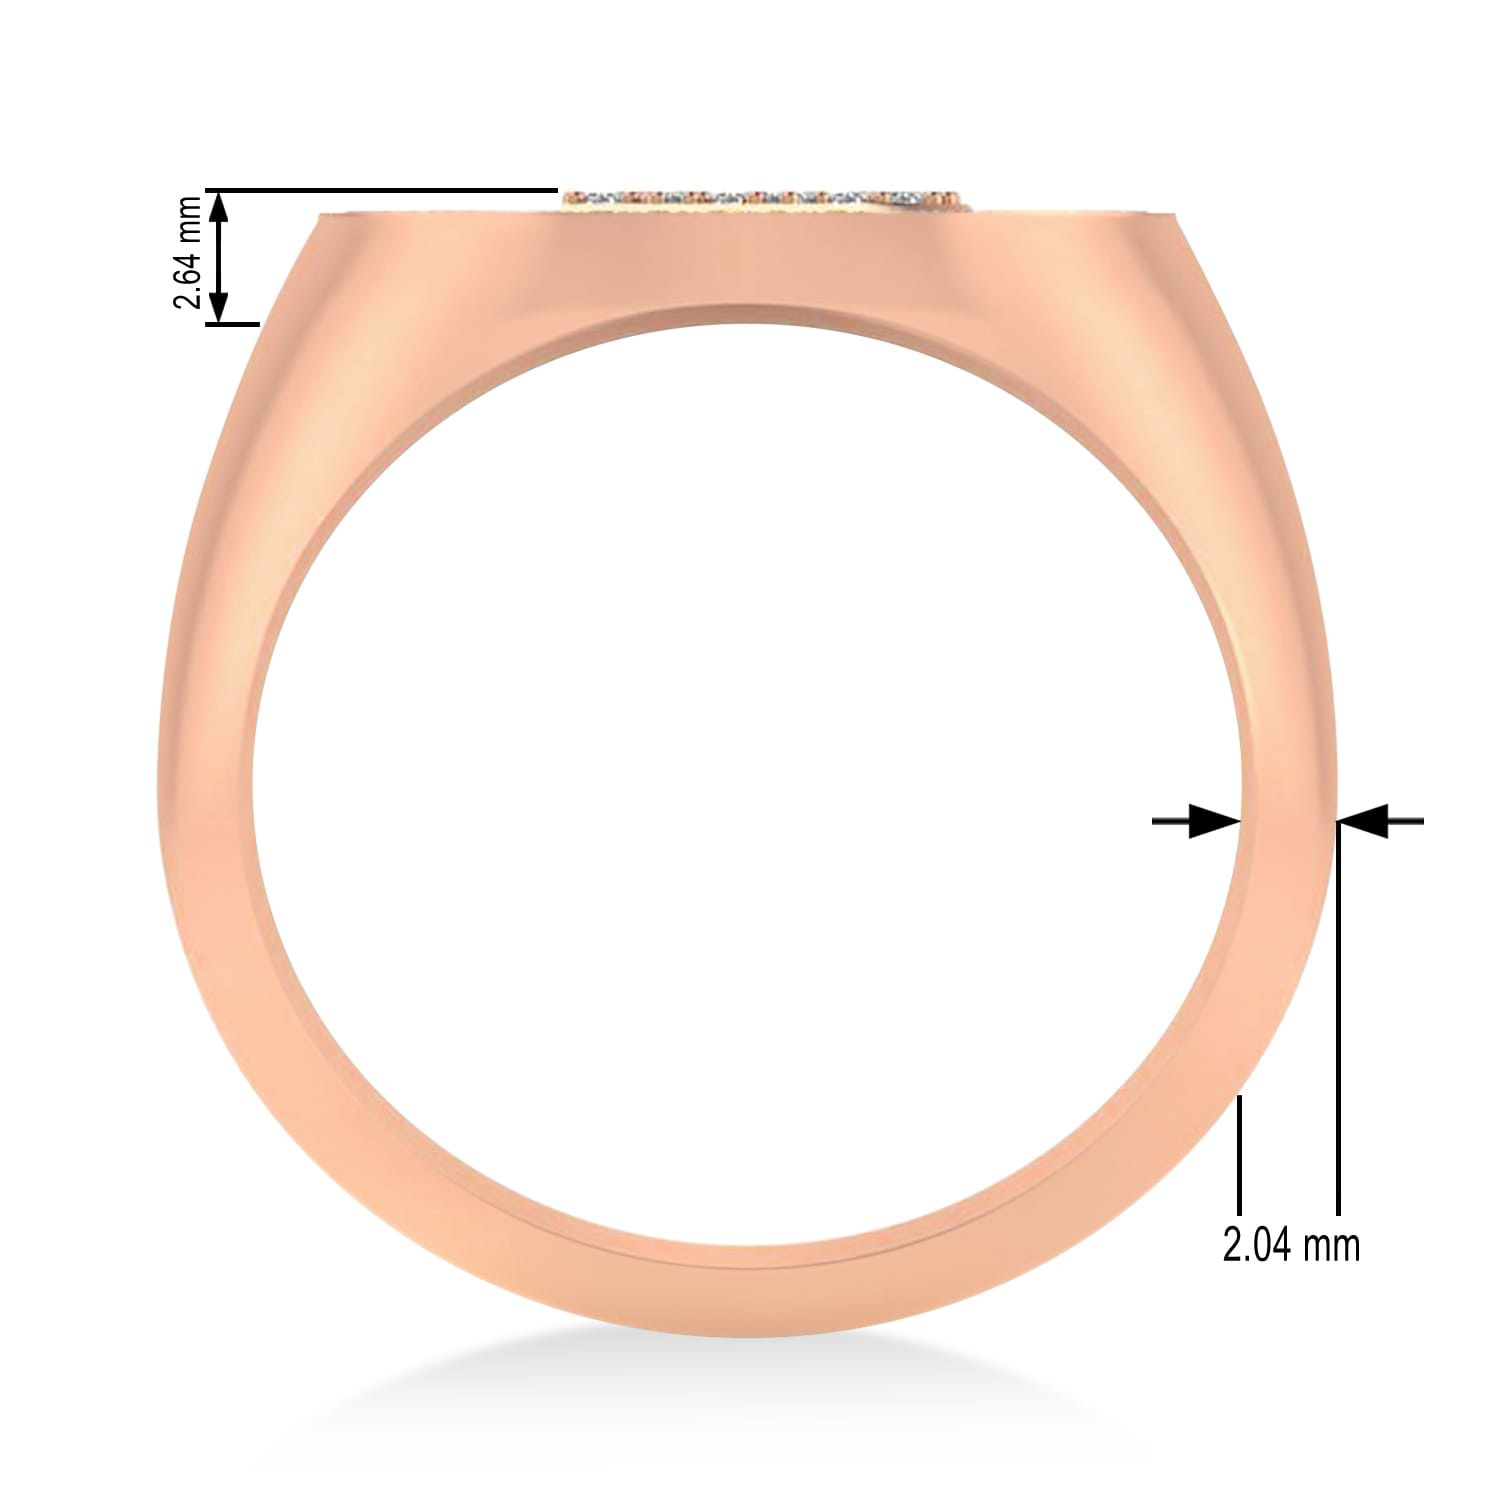 Diamond Cryptocurrency Bitcoin Men's Ring 18k Rose Gold (0.34ct)